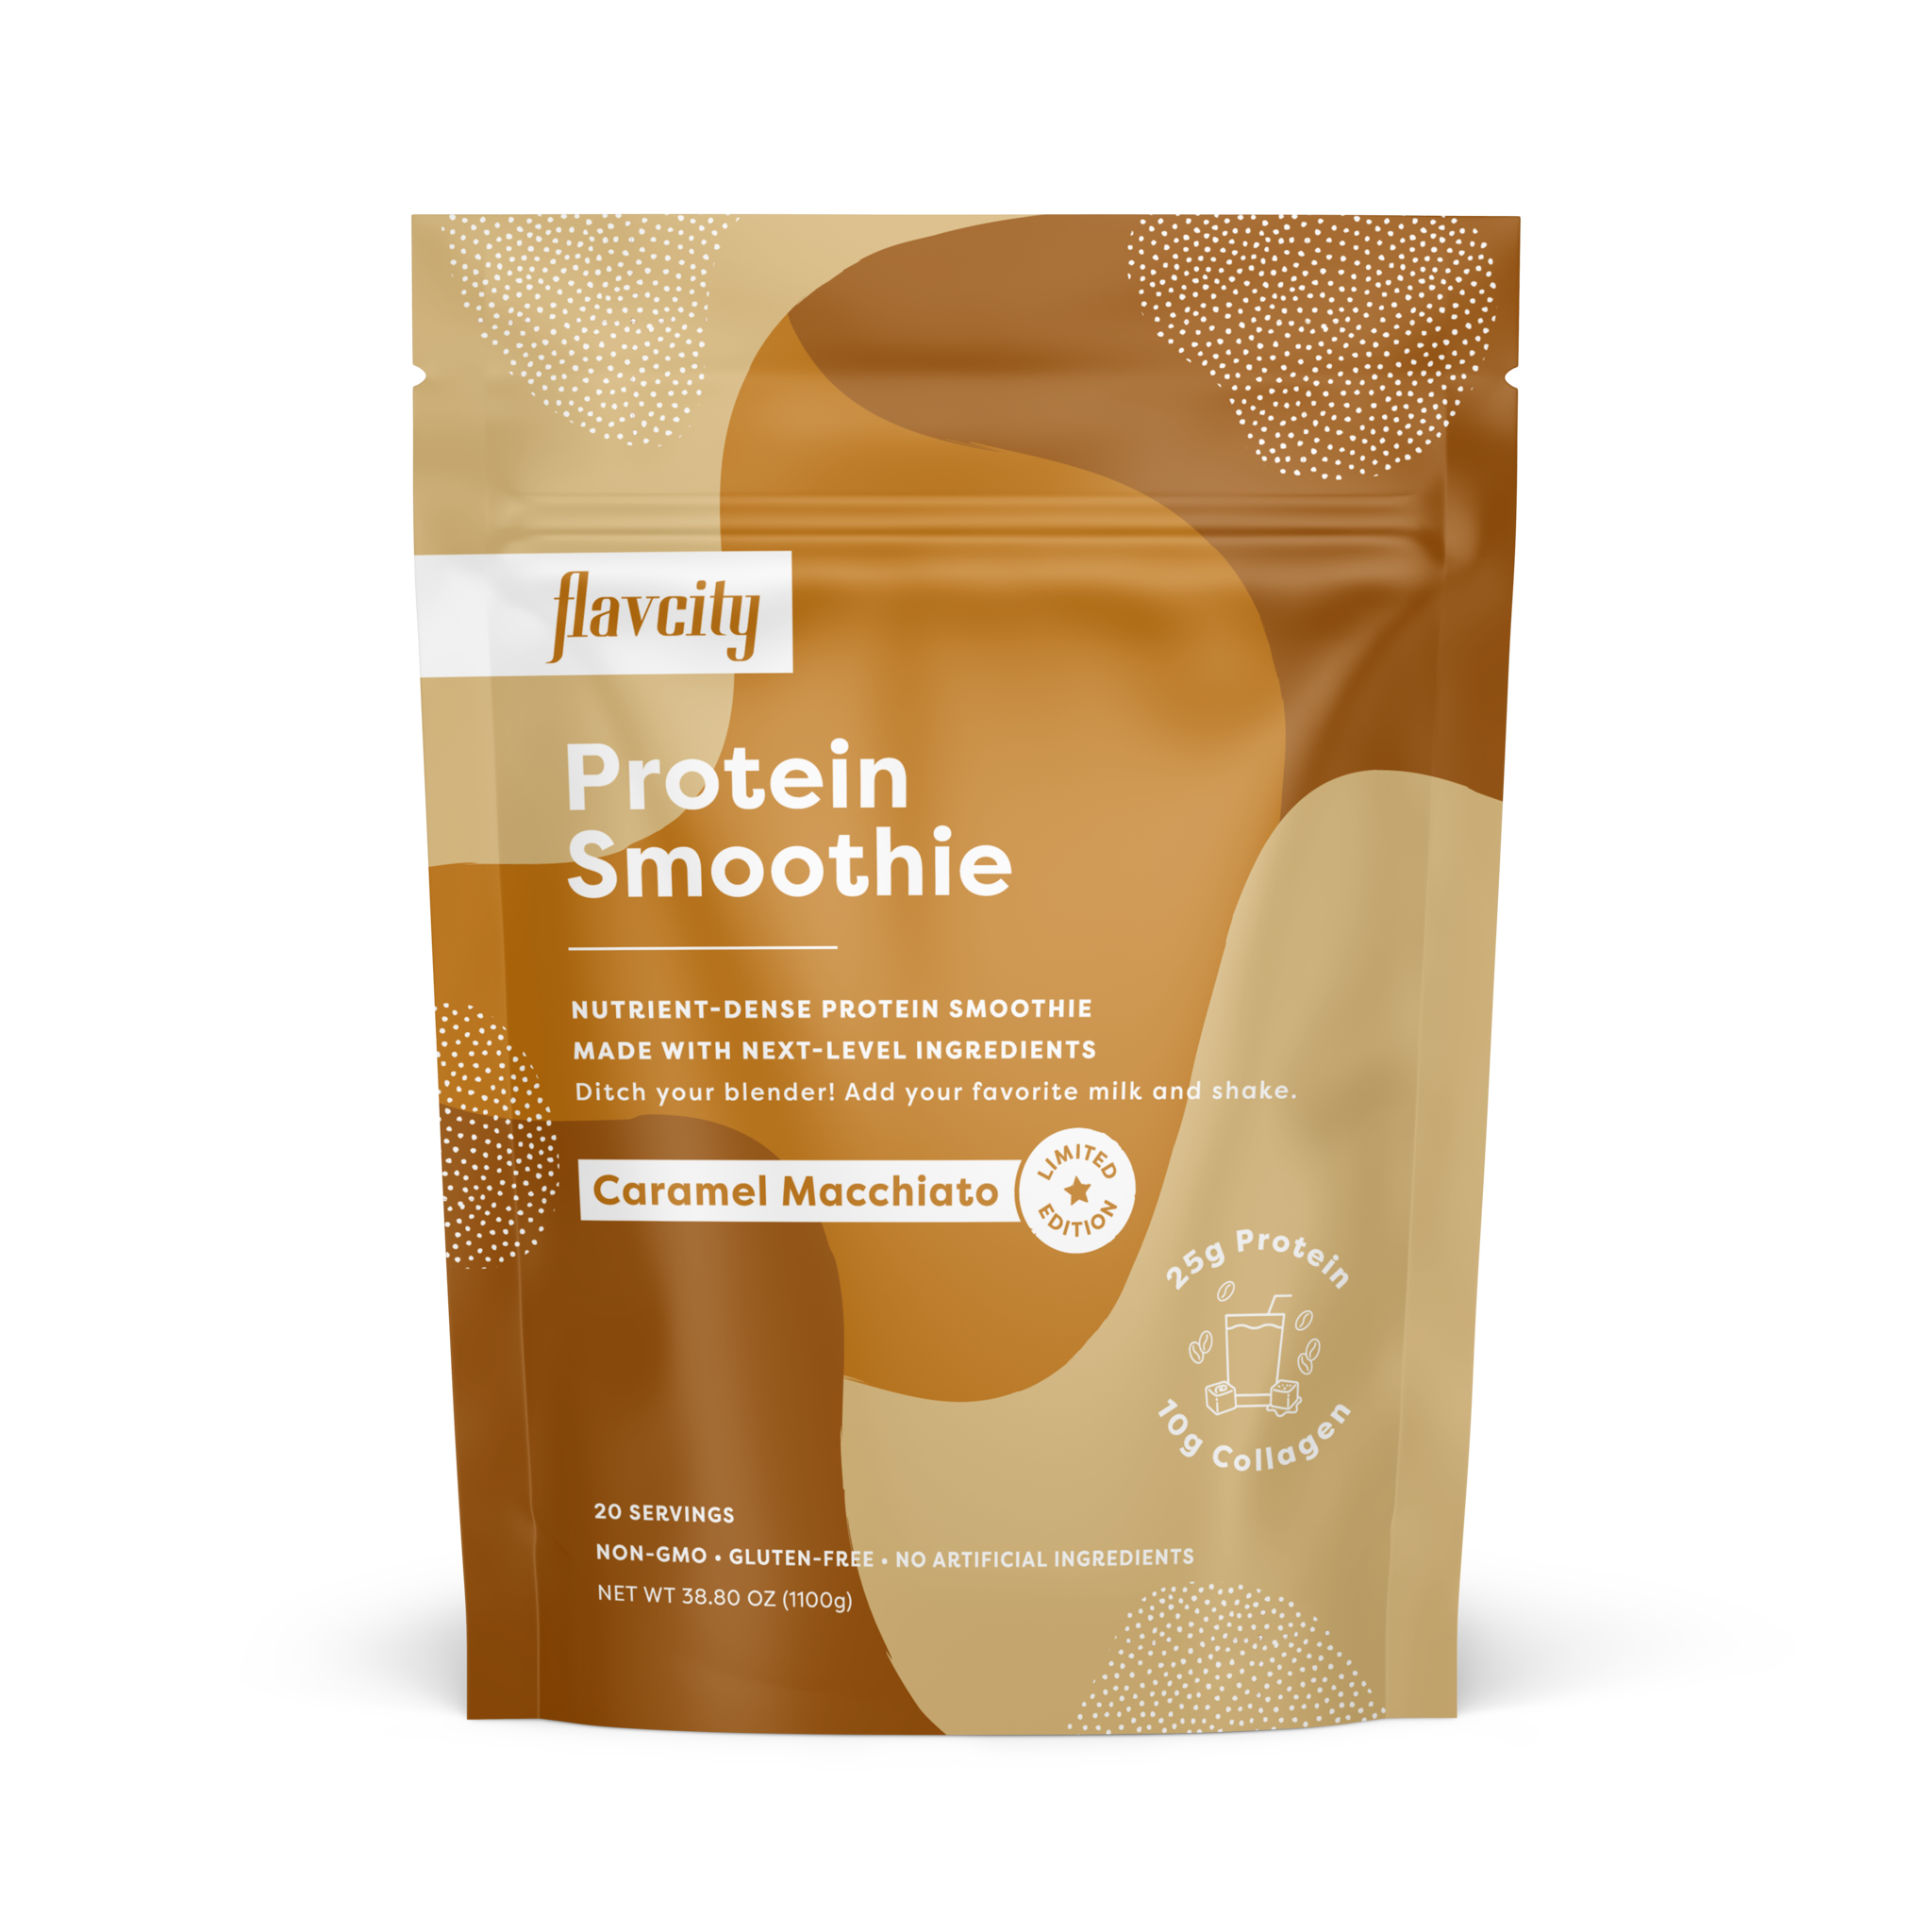 FlavCity Protein Smoothie - Caramel Macchiato *Limited Edition* (20 Servings) - 25g Protein - Gluten Free